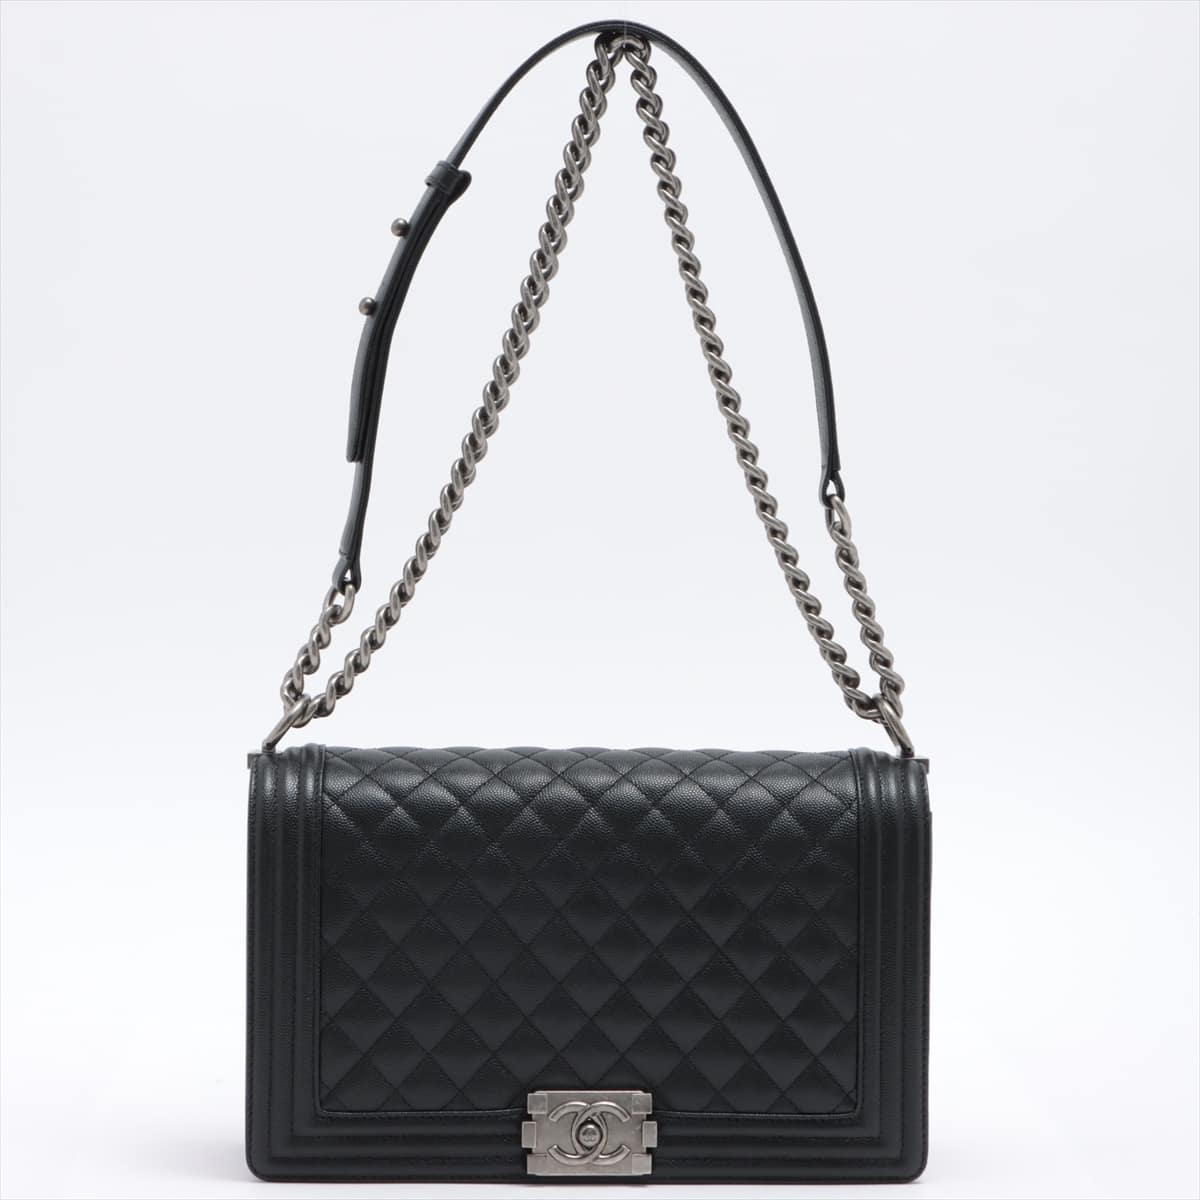 Chanel Boy Chanel Caviarskin Chain shoulder bag Black Silver Metal fittings There is an IC chip